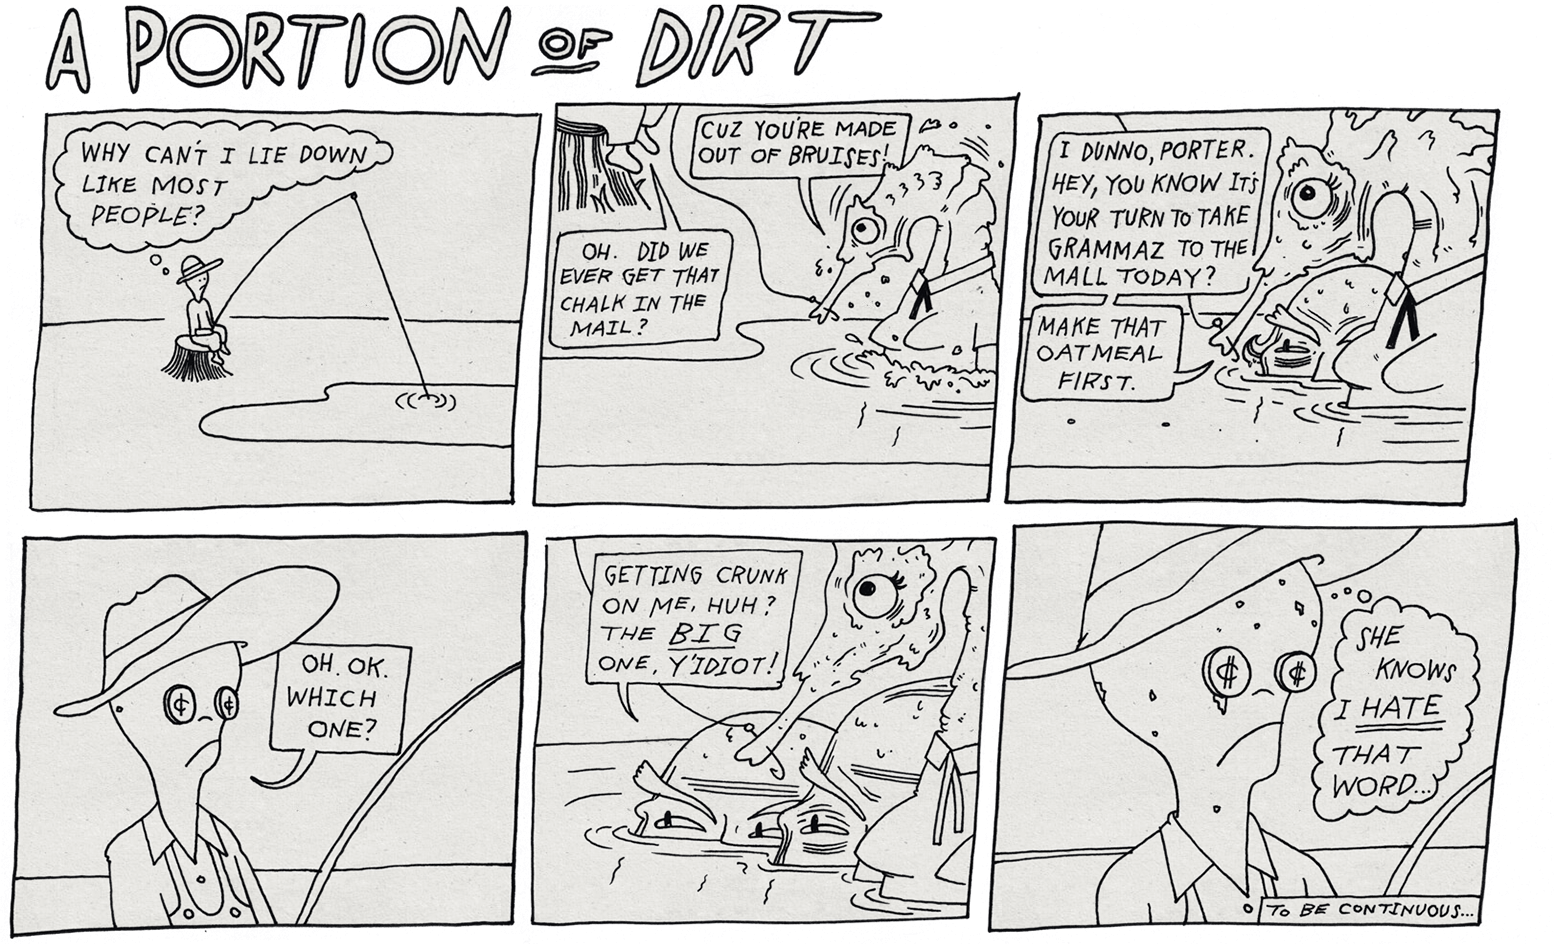 Portion of Dirt by terrence-white